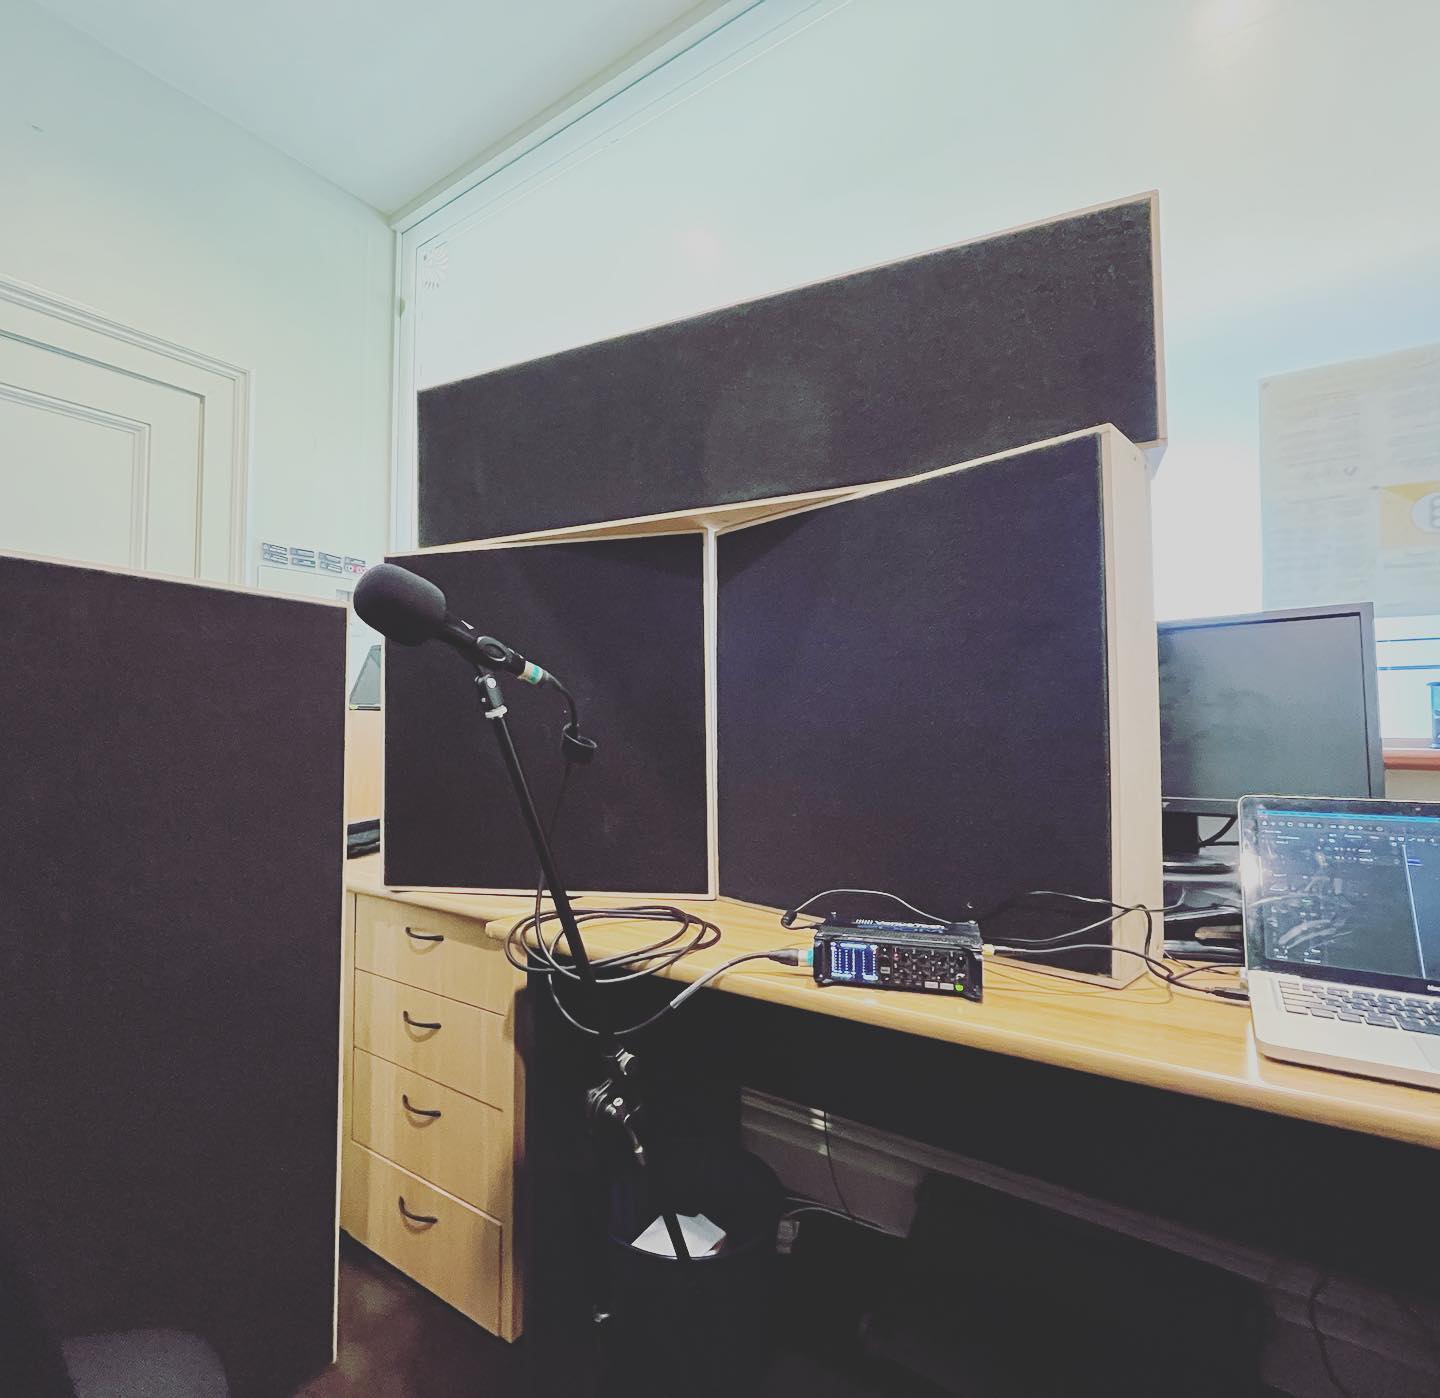 Popped up a few @autexacoustics panels to briefly turn the bosses office into a vocal booth to record some new Front Of House announcements.

#Takeyourseats

@neumann.berlin #KMS105
@zoom #f8 
#Logic Pro